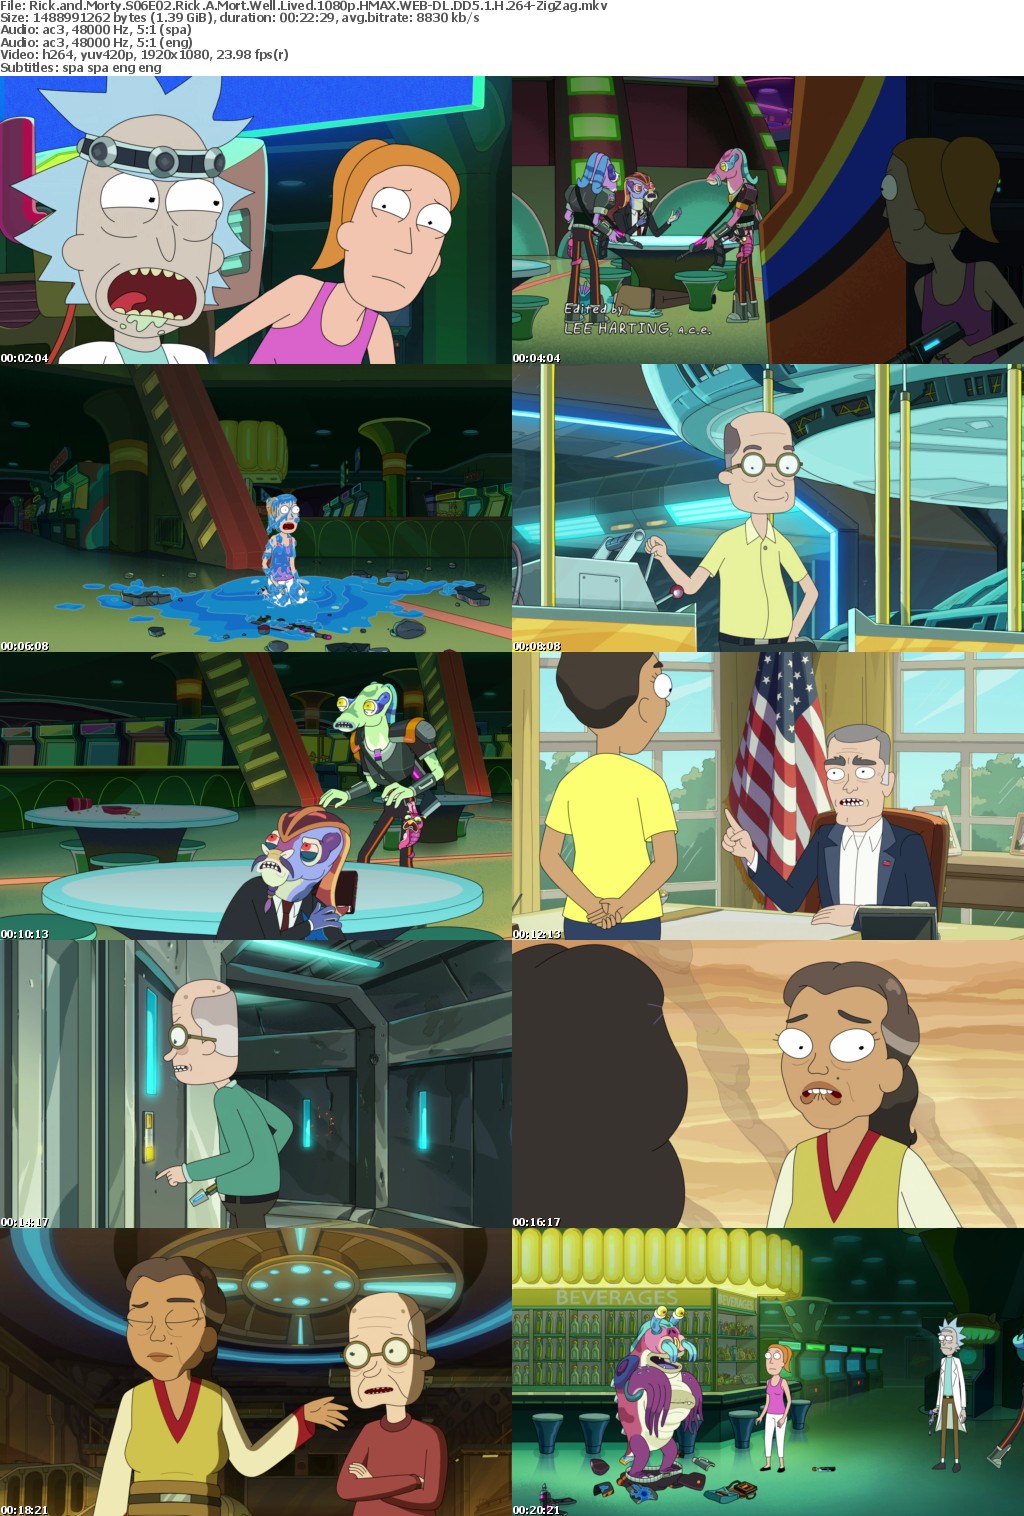 Rick and Morty S06E02 Rick A Mort Well Lived 1080p HMAX WEB-DL DUAL AUDIO DD5 1 H 264-ZigZag